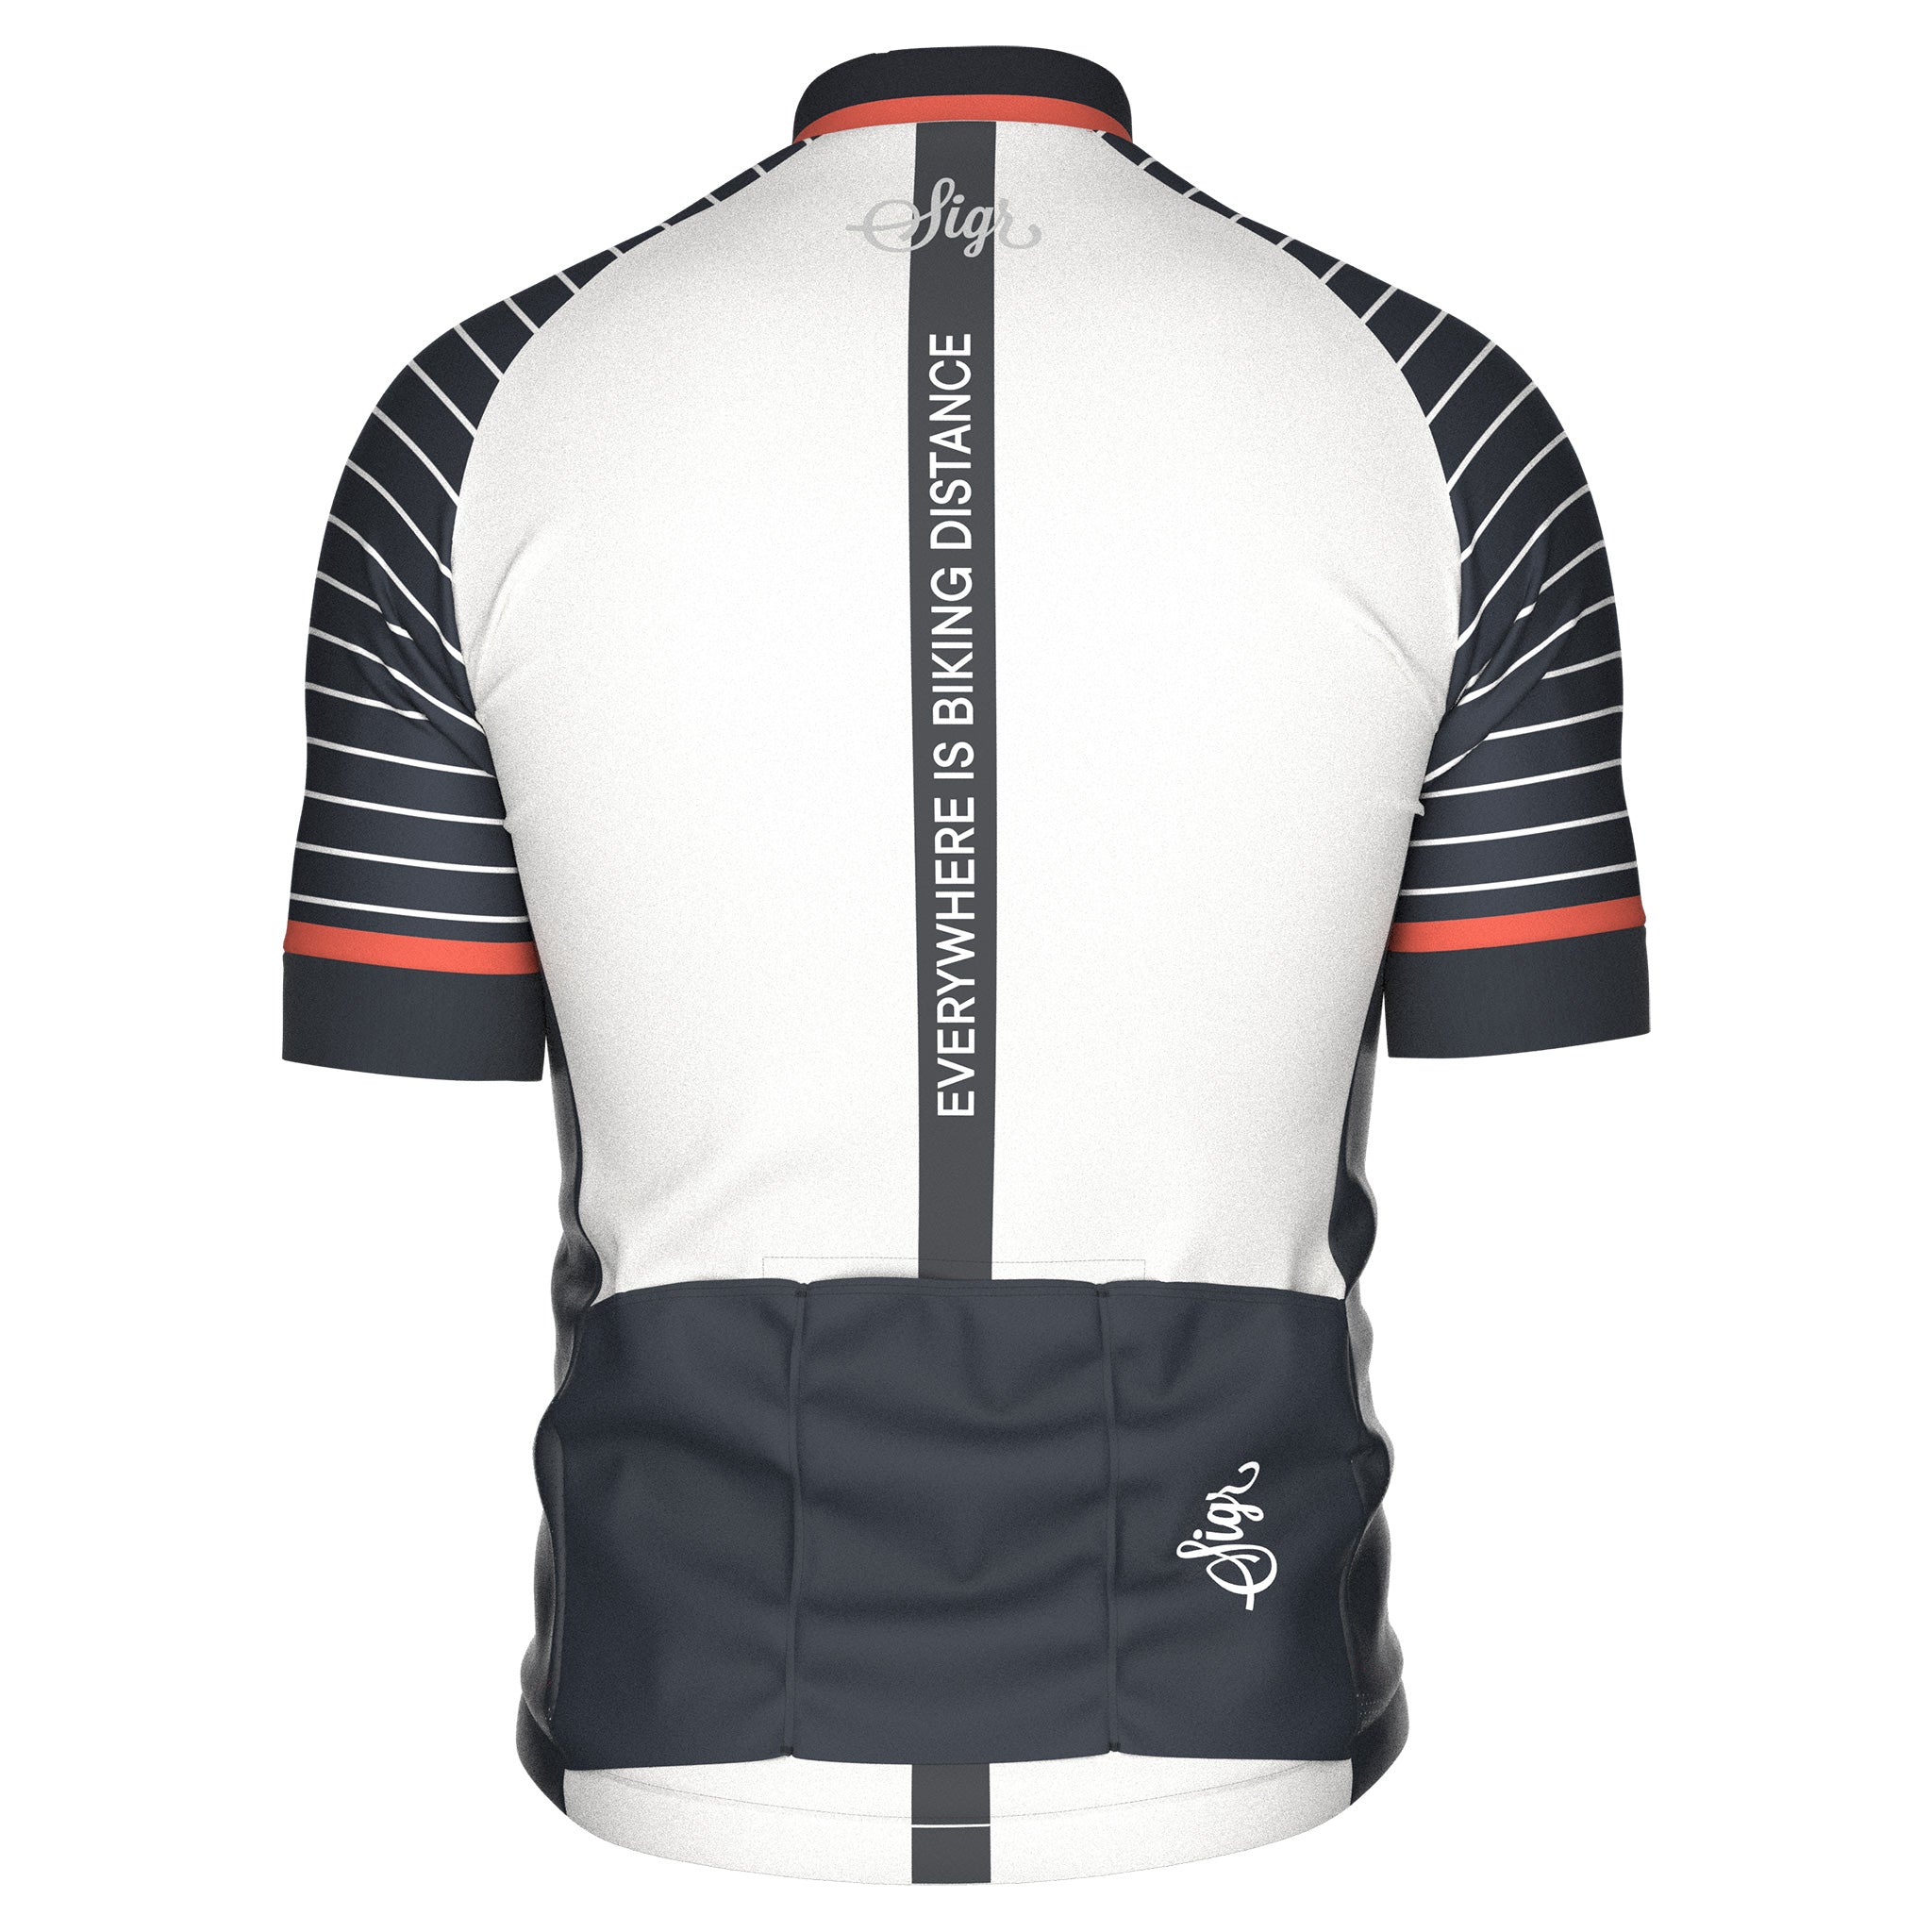 Black Horizon with Back Slogan - Road Cycling Jersey for Men